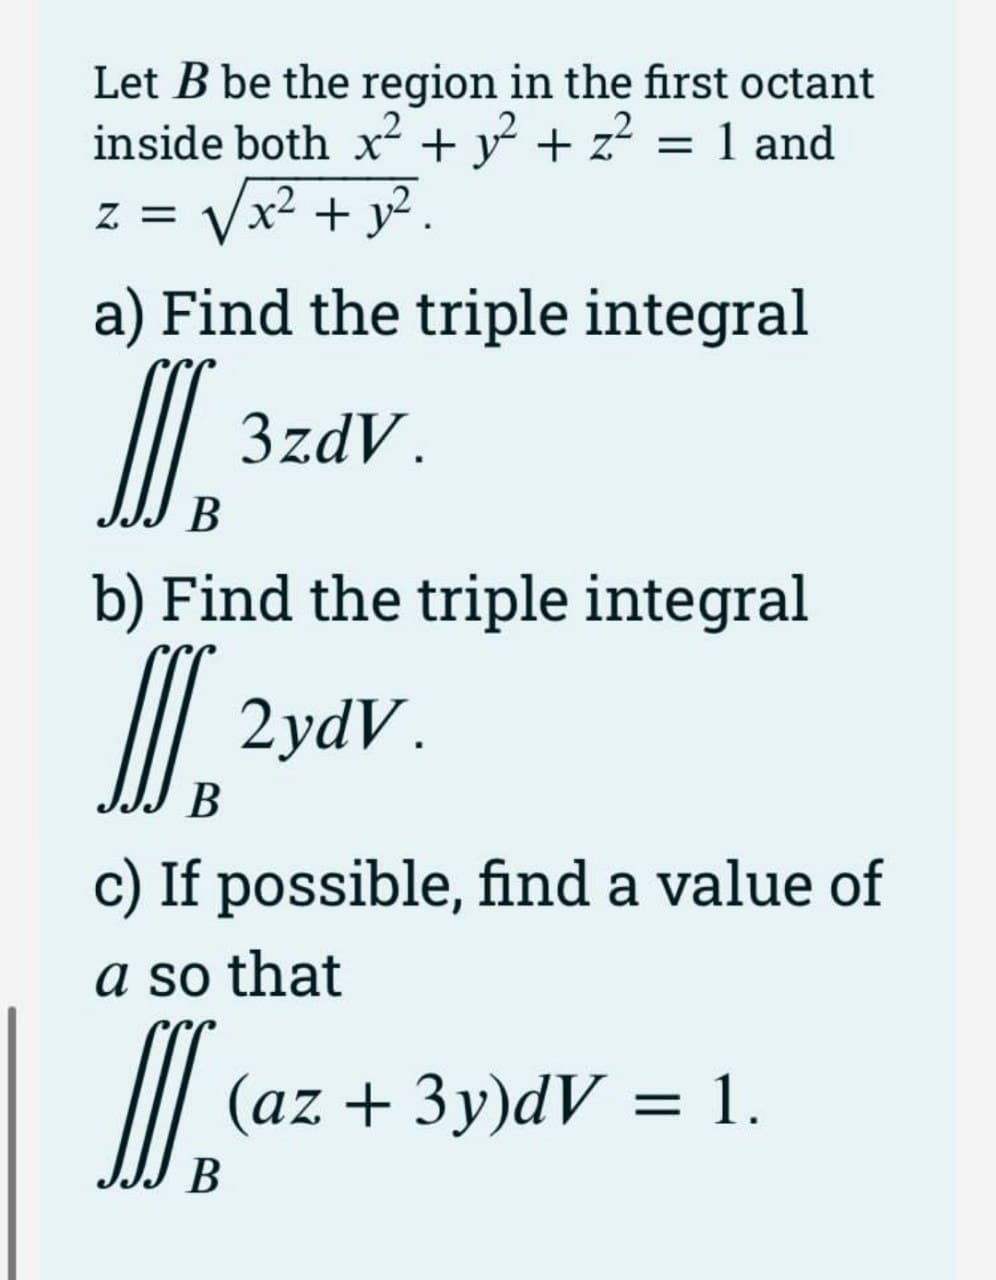 Let B be the region in the first octant
inside both x? + y + z? = 1 and
Vx? + y? .
Z =
a) Find the triple integral
I.
3zdV.
В
b) Find the triple integral
2ydV.
В
c) If possible, find a value of
a so that
(az + 3y)dV = 1.
В
